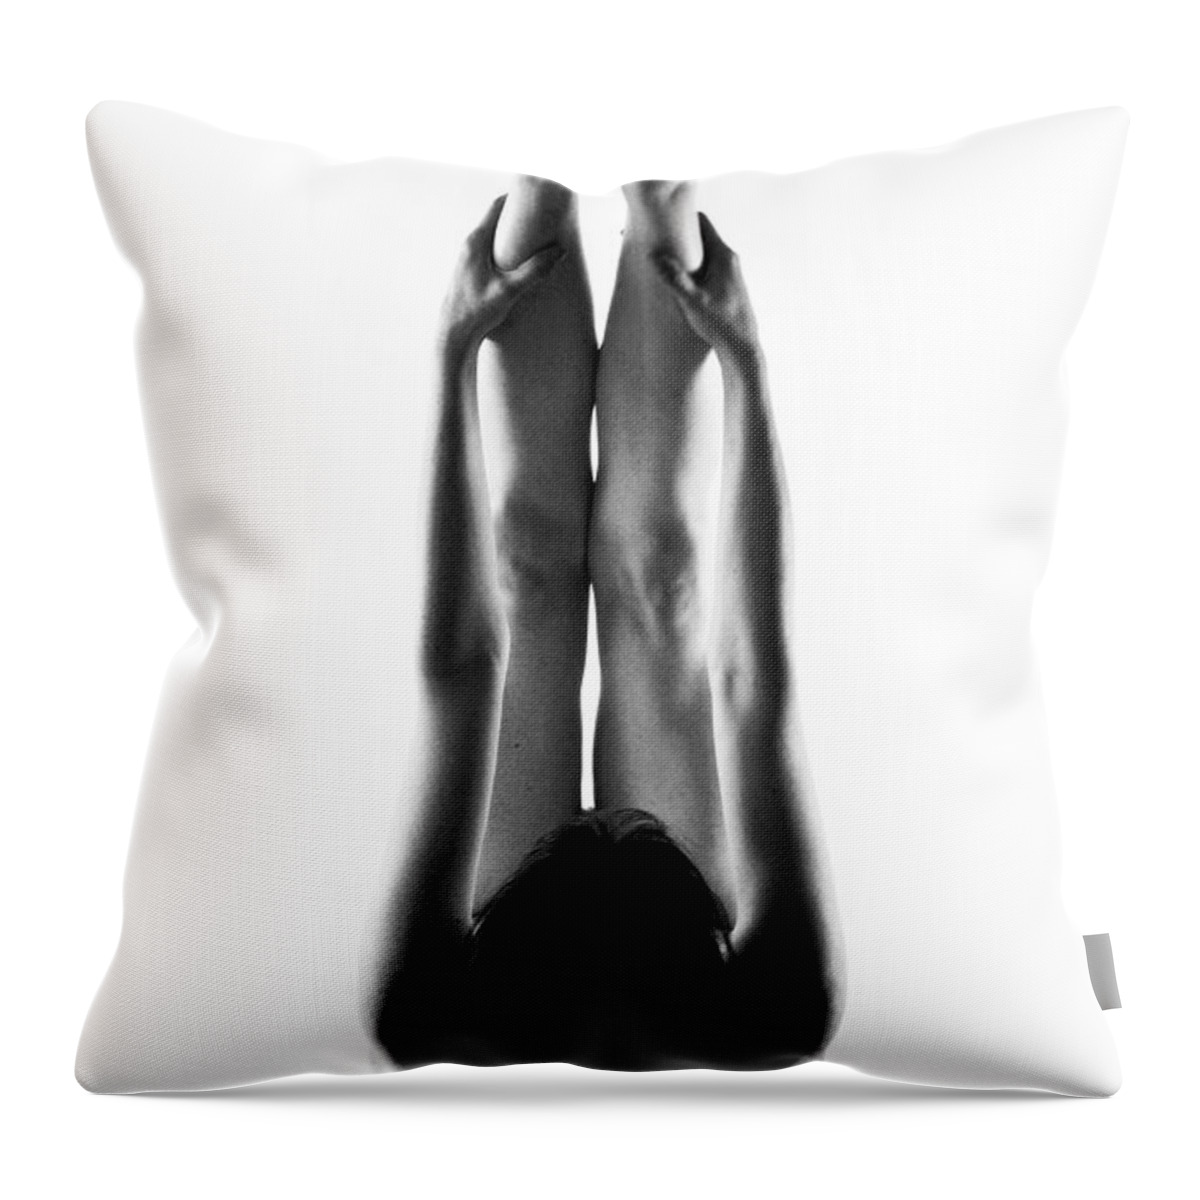 Artistic Throw Pillow featuring the photograph Imperfection by Robert WK Clark